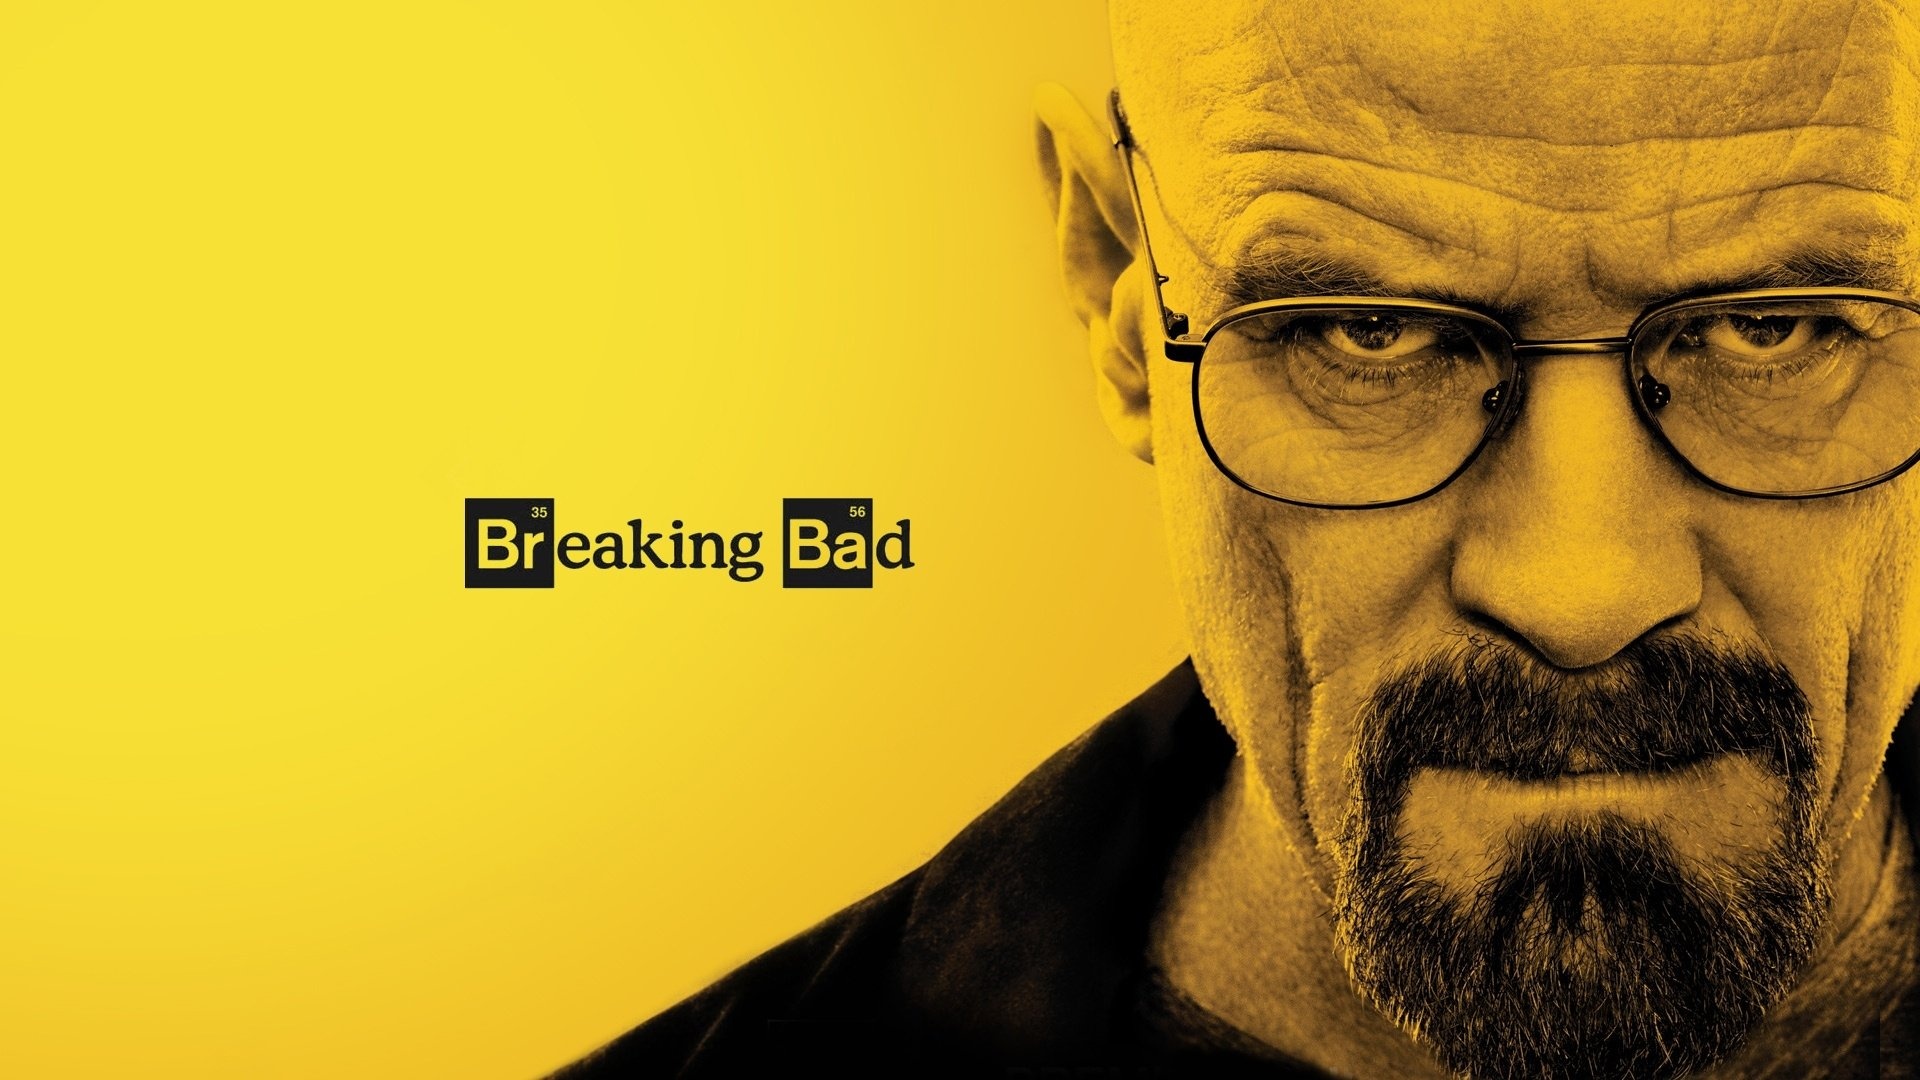 Bryan Cranston: One of the most popular and versatile actors of our time. 1920x1080 Full HD Wallpaper.